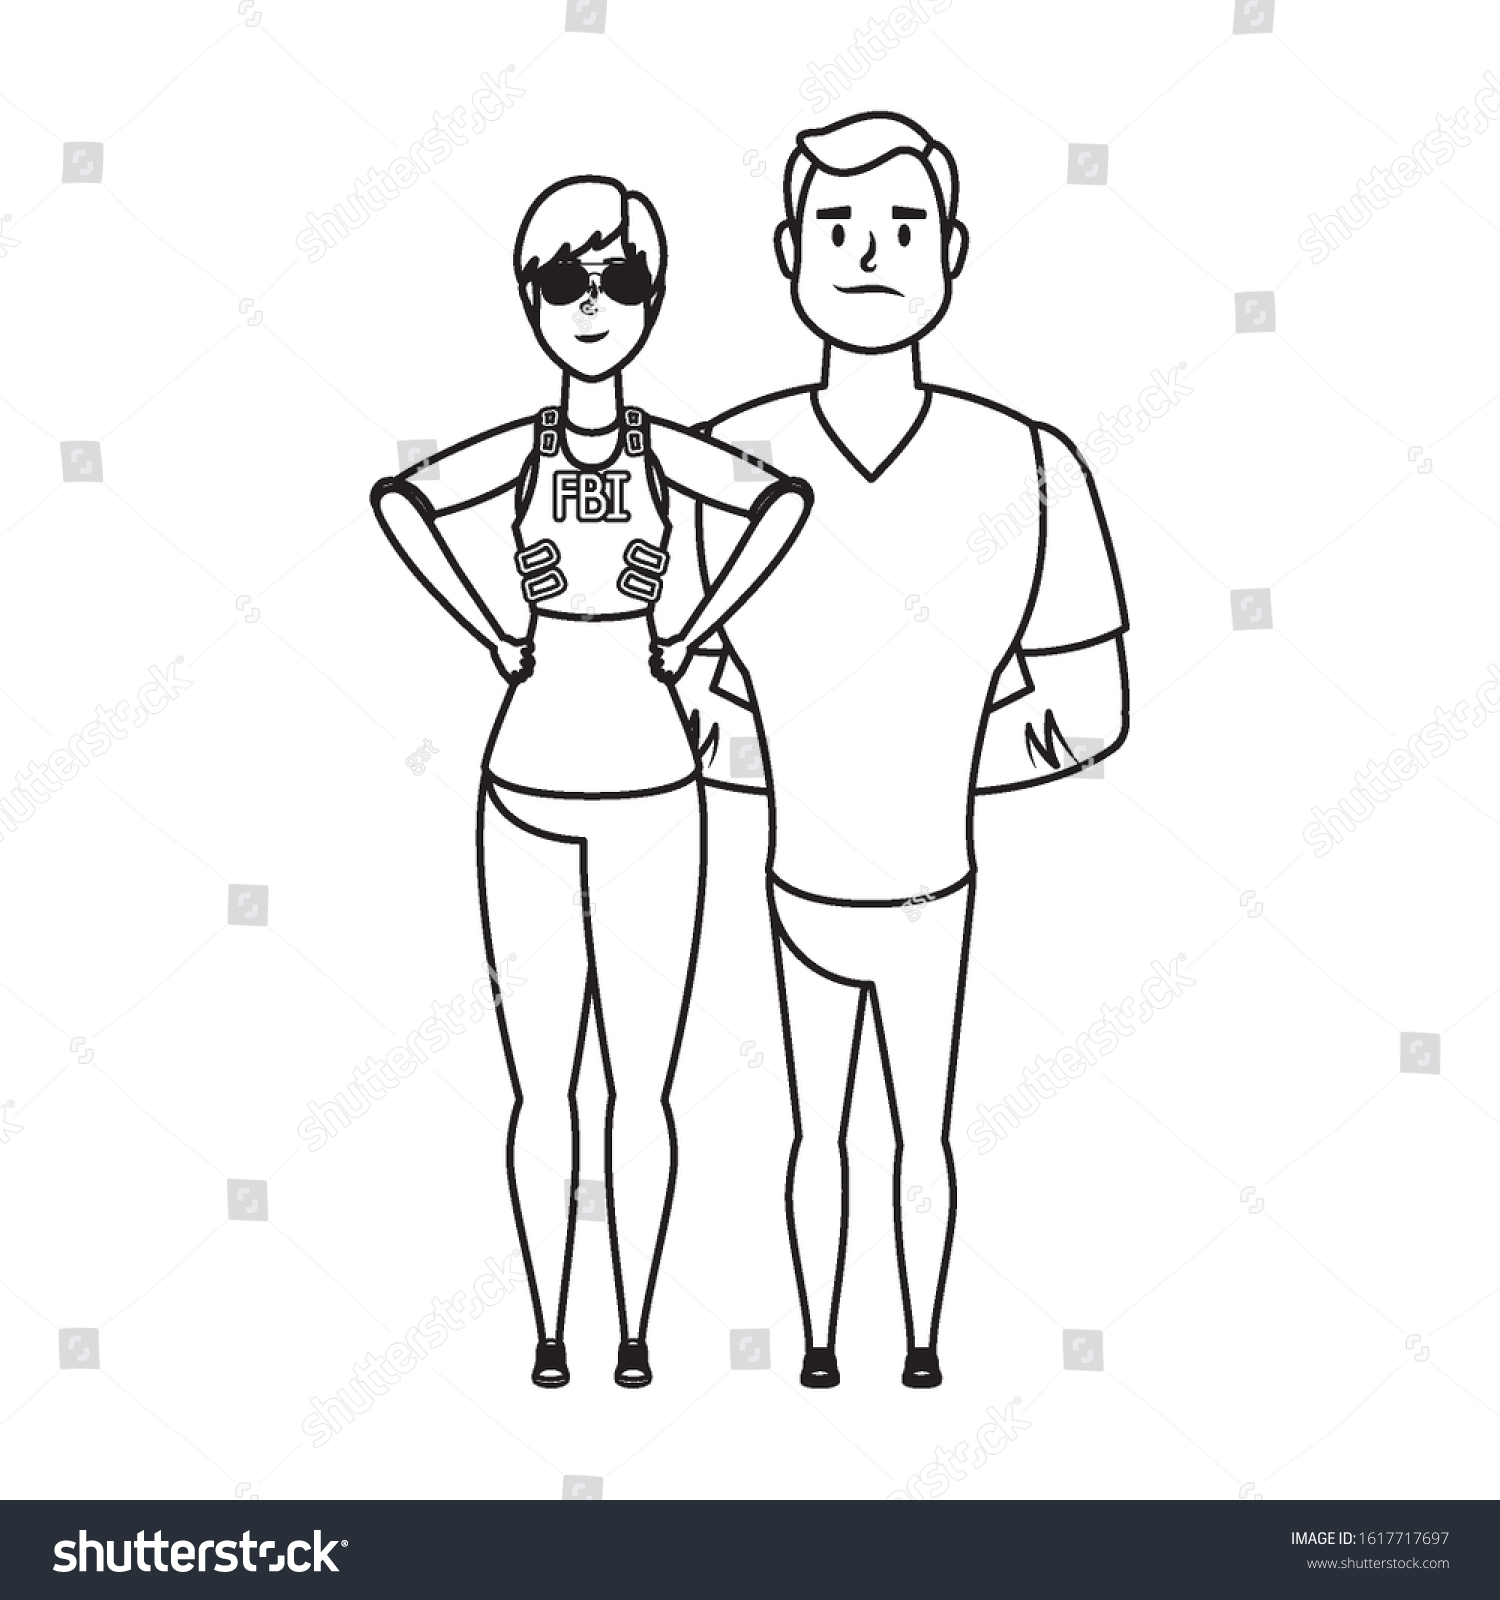 Young Man With Woman Fbi Agent Characters Vector Royalty Free Stock Vector 1617717697 